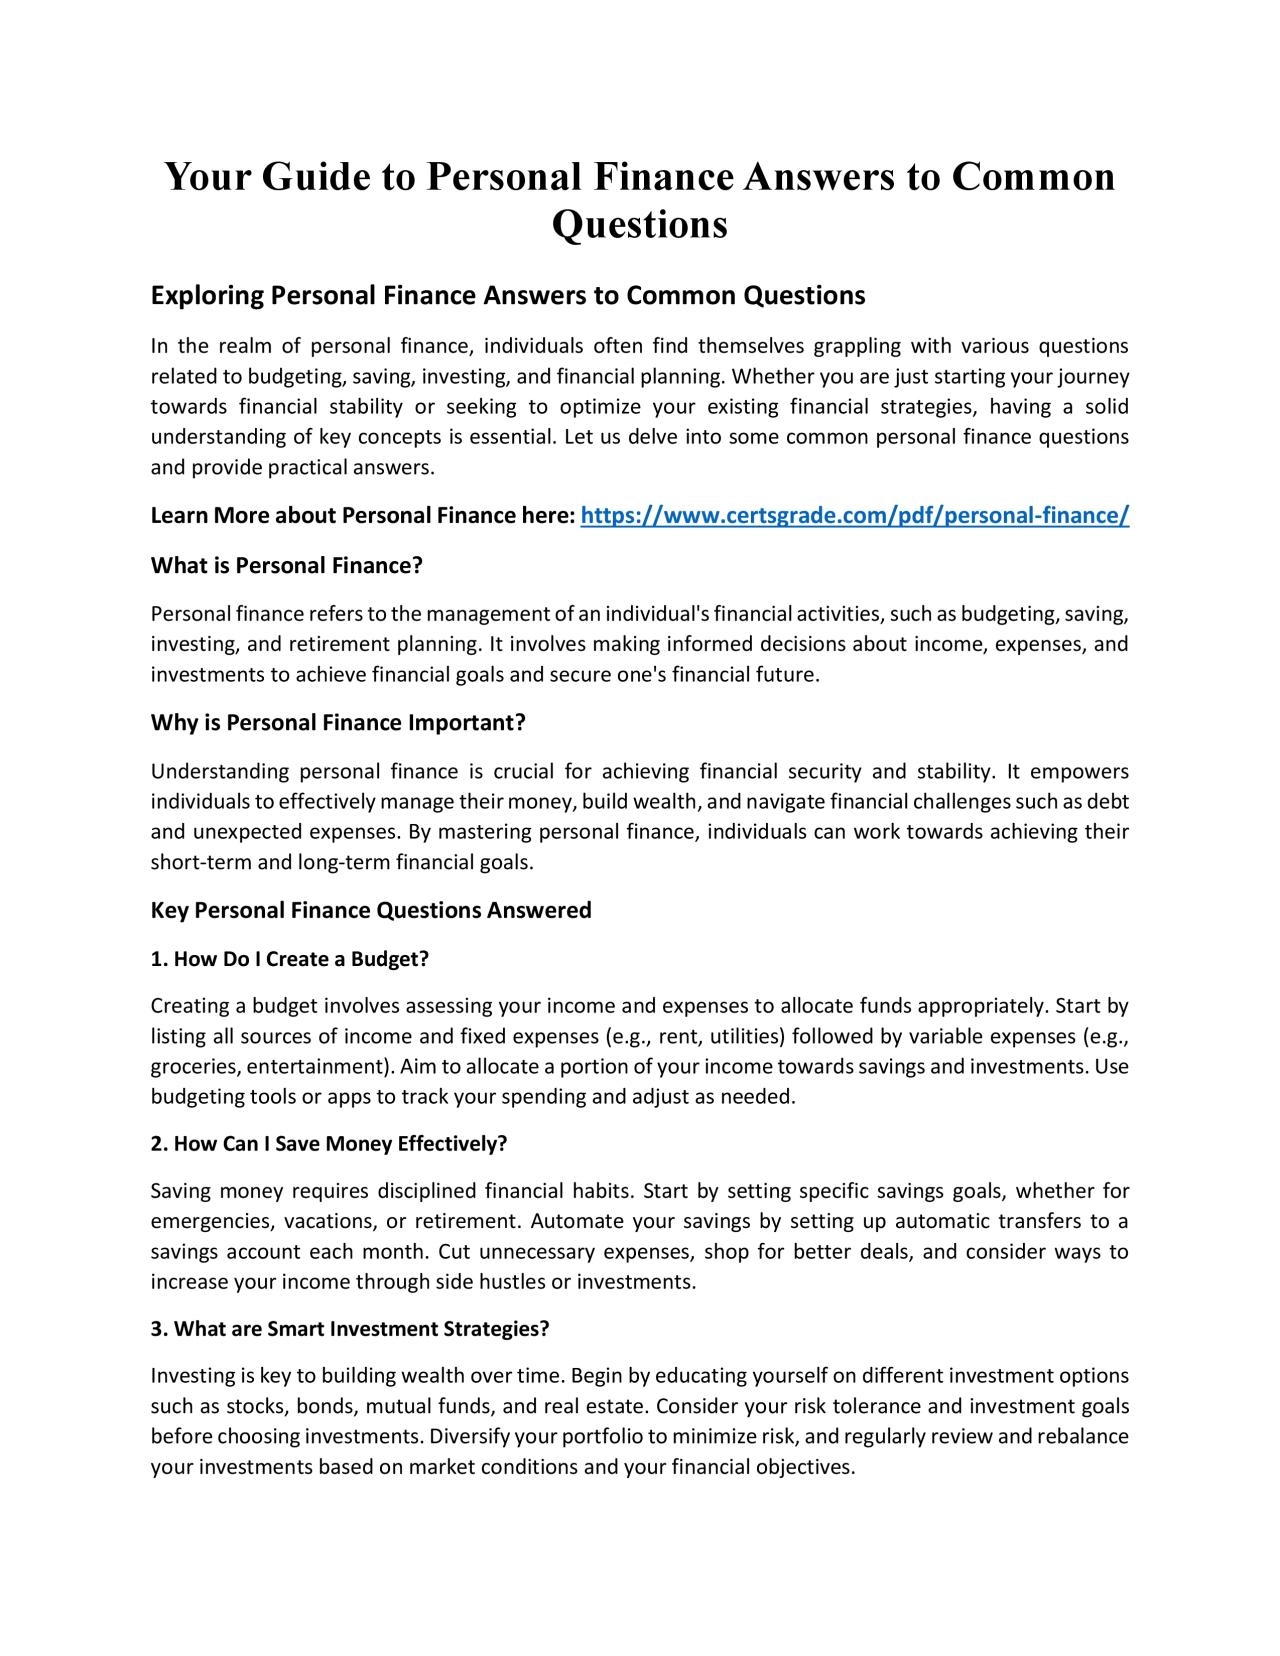 Your Guide to Personal Finance Answers to Common Questions